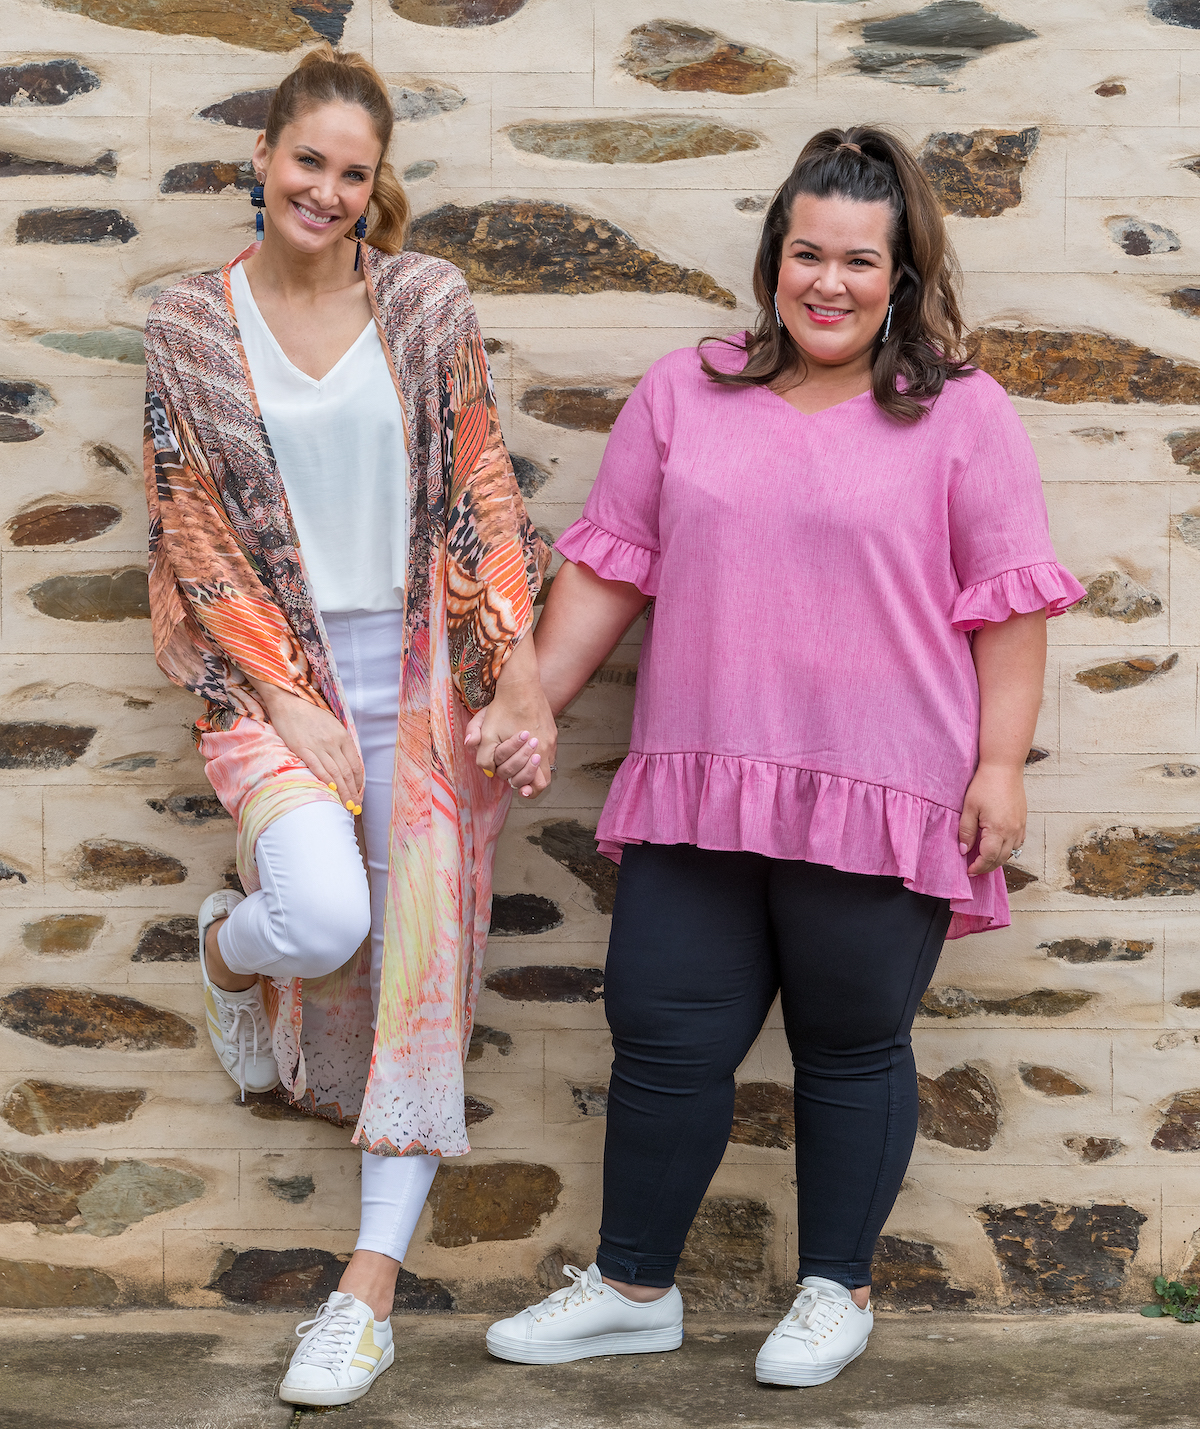 WIN two gorgeous spring outfits for you and your bestie from Serafina Boutique